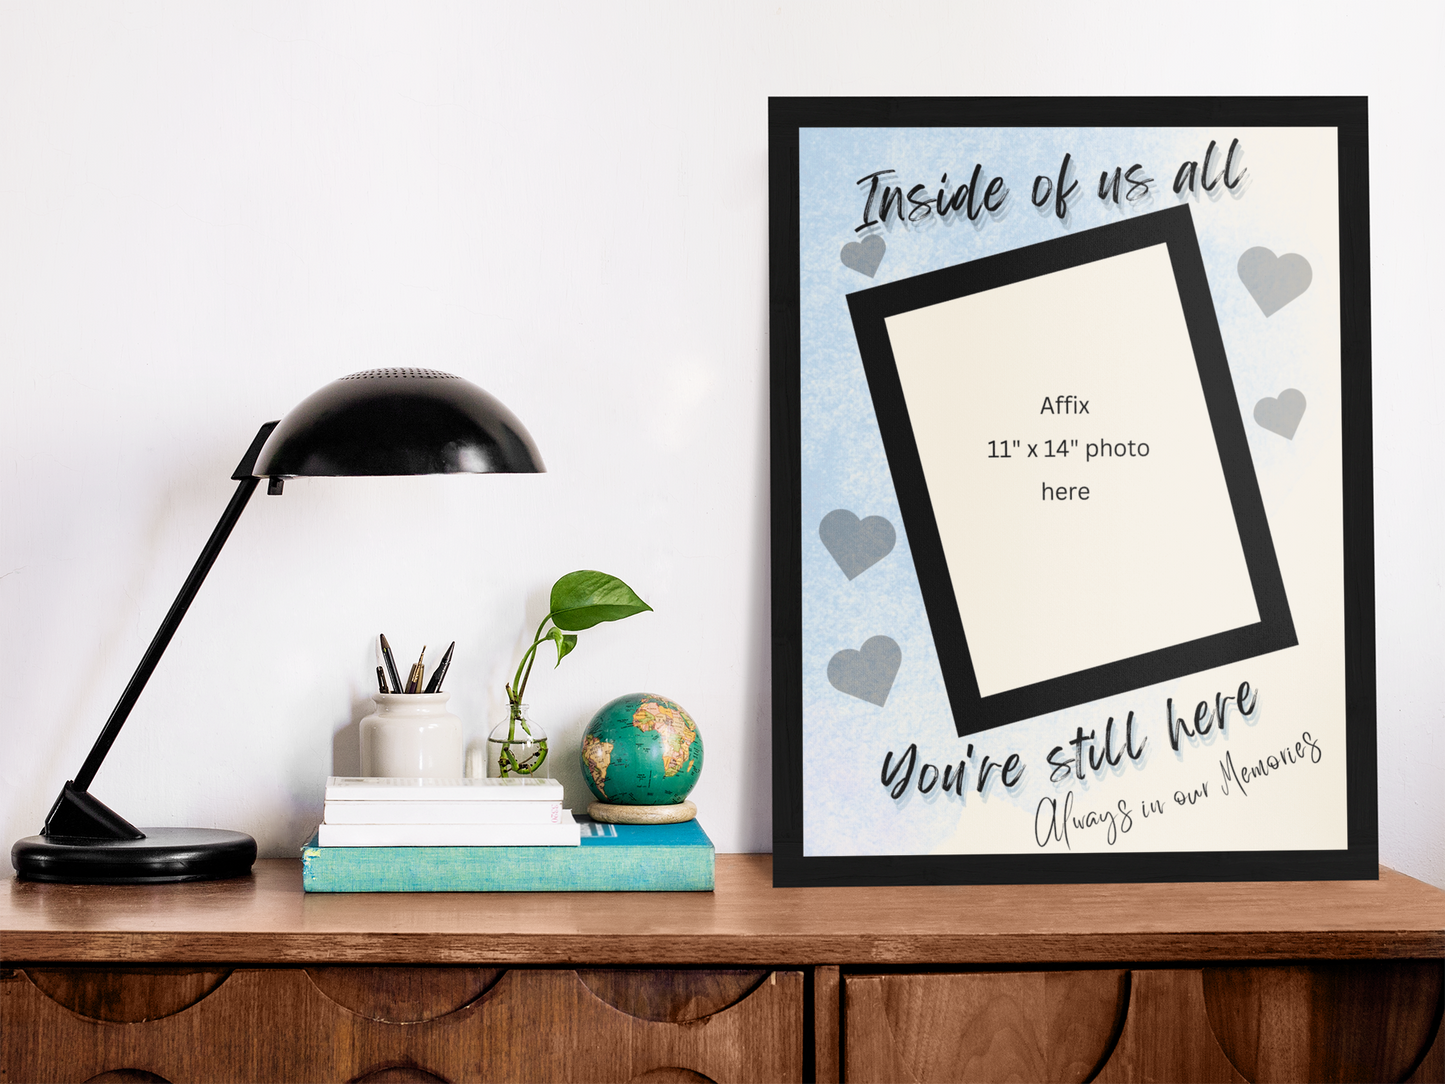 MEMORY of a LOVED ONE - QUIRKY UNIQUE WALL ART in blue tones, featuring heartfelt words of love to remember them always.